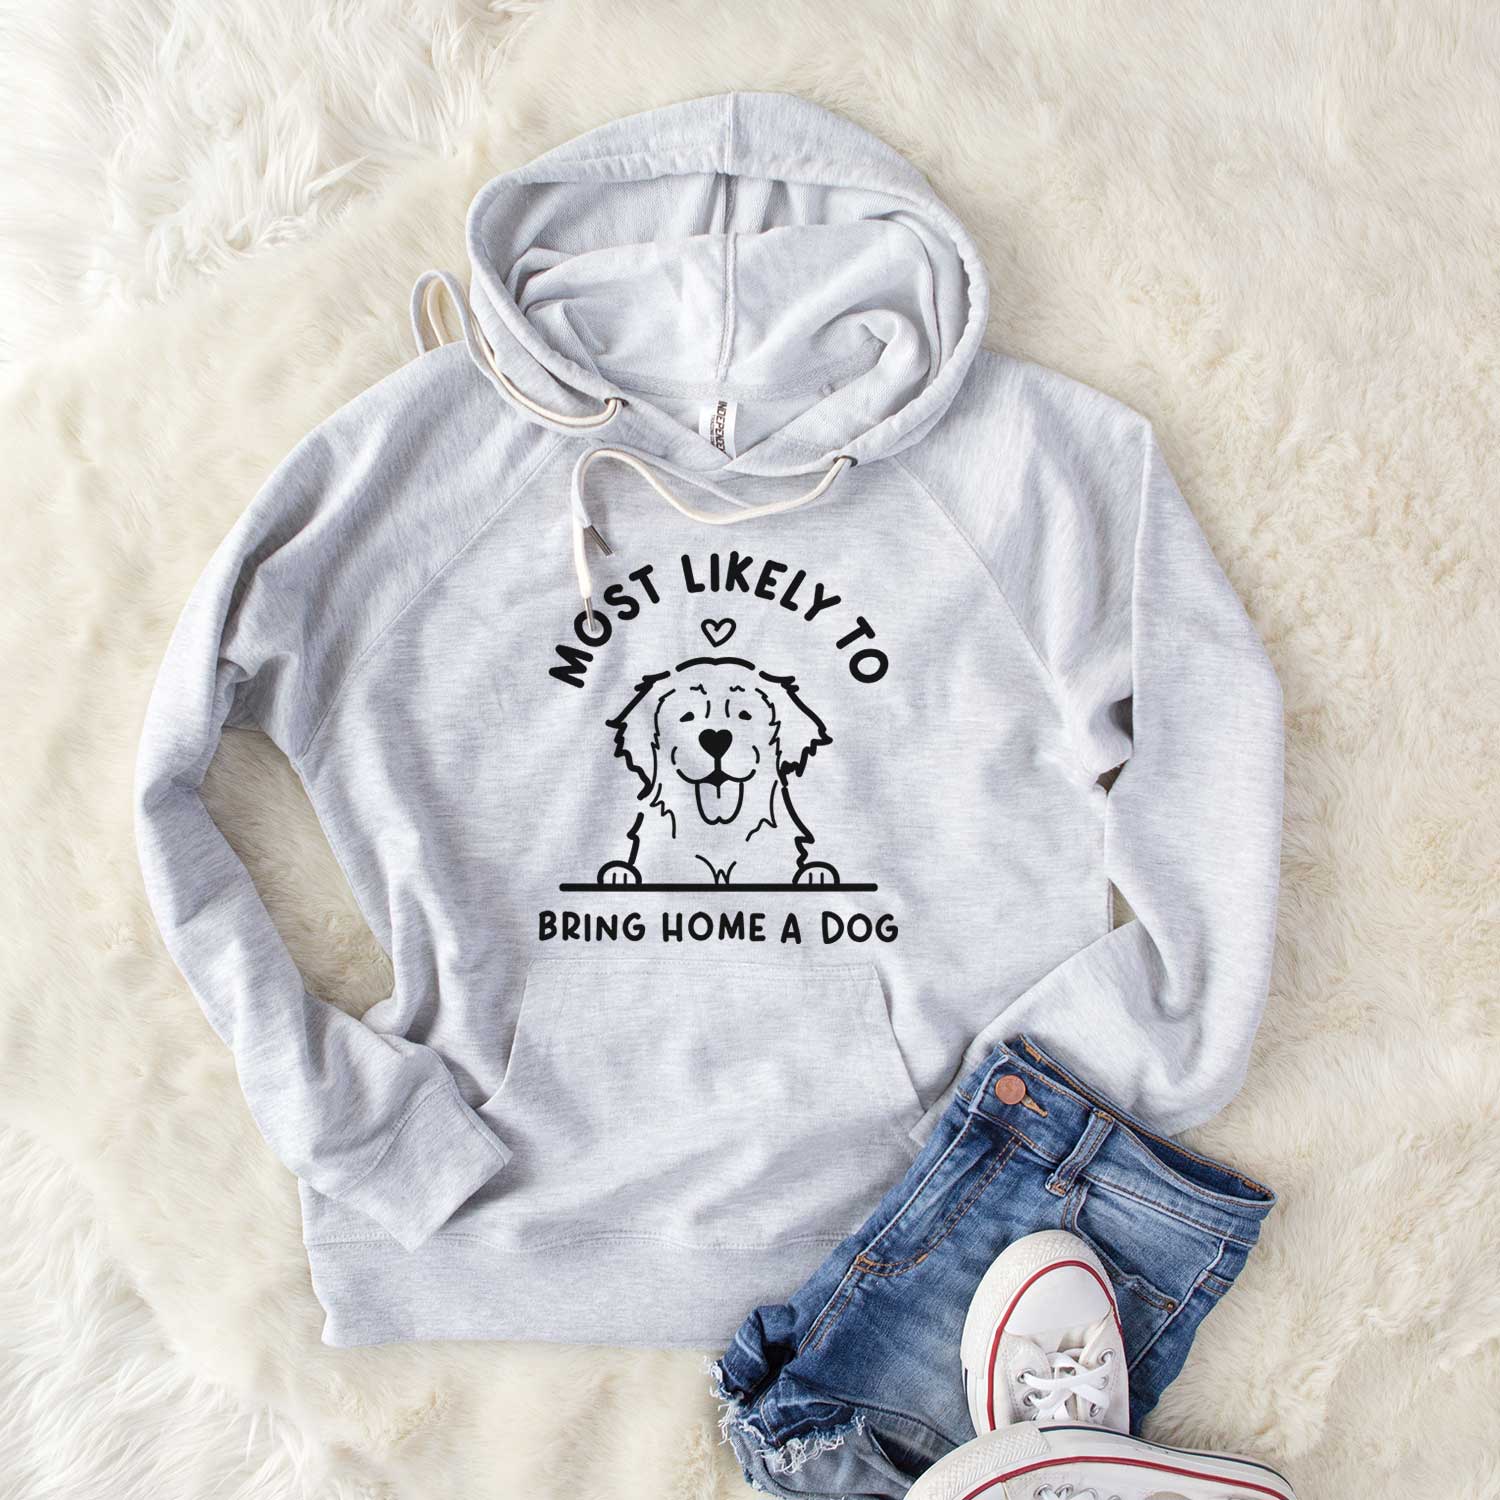 Most Likely to Bring Home a Dog - Golden Retriever - Unisex Loopback Terry Hoodie